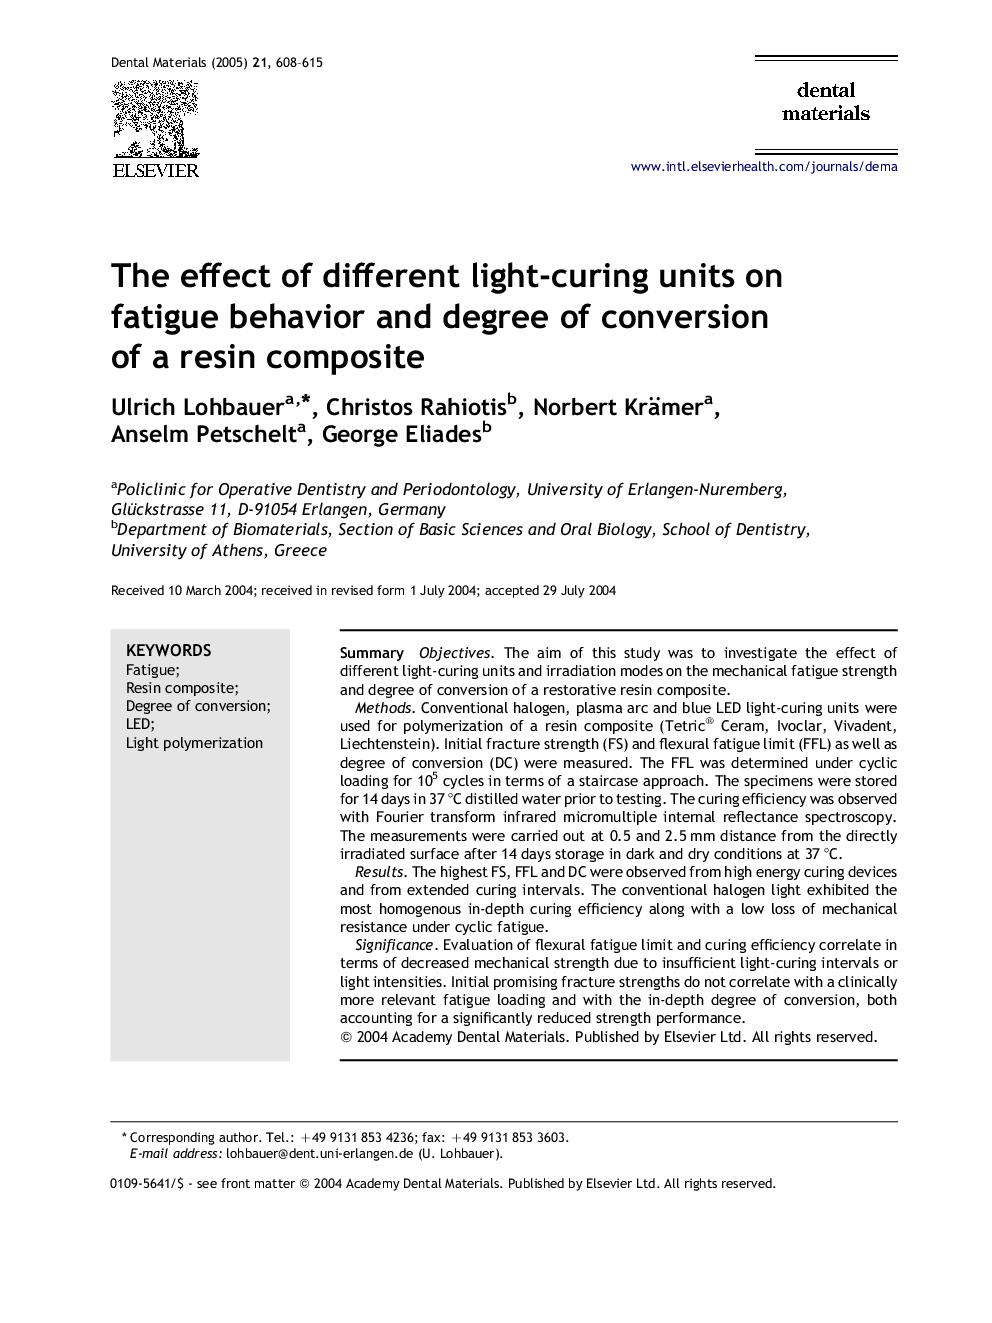 The effect of different light-curing units on fatigue behavior and degree of conversion of a resin composite